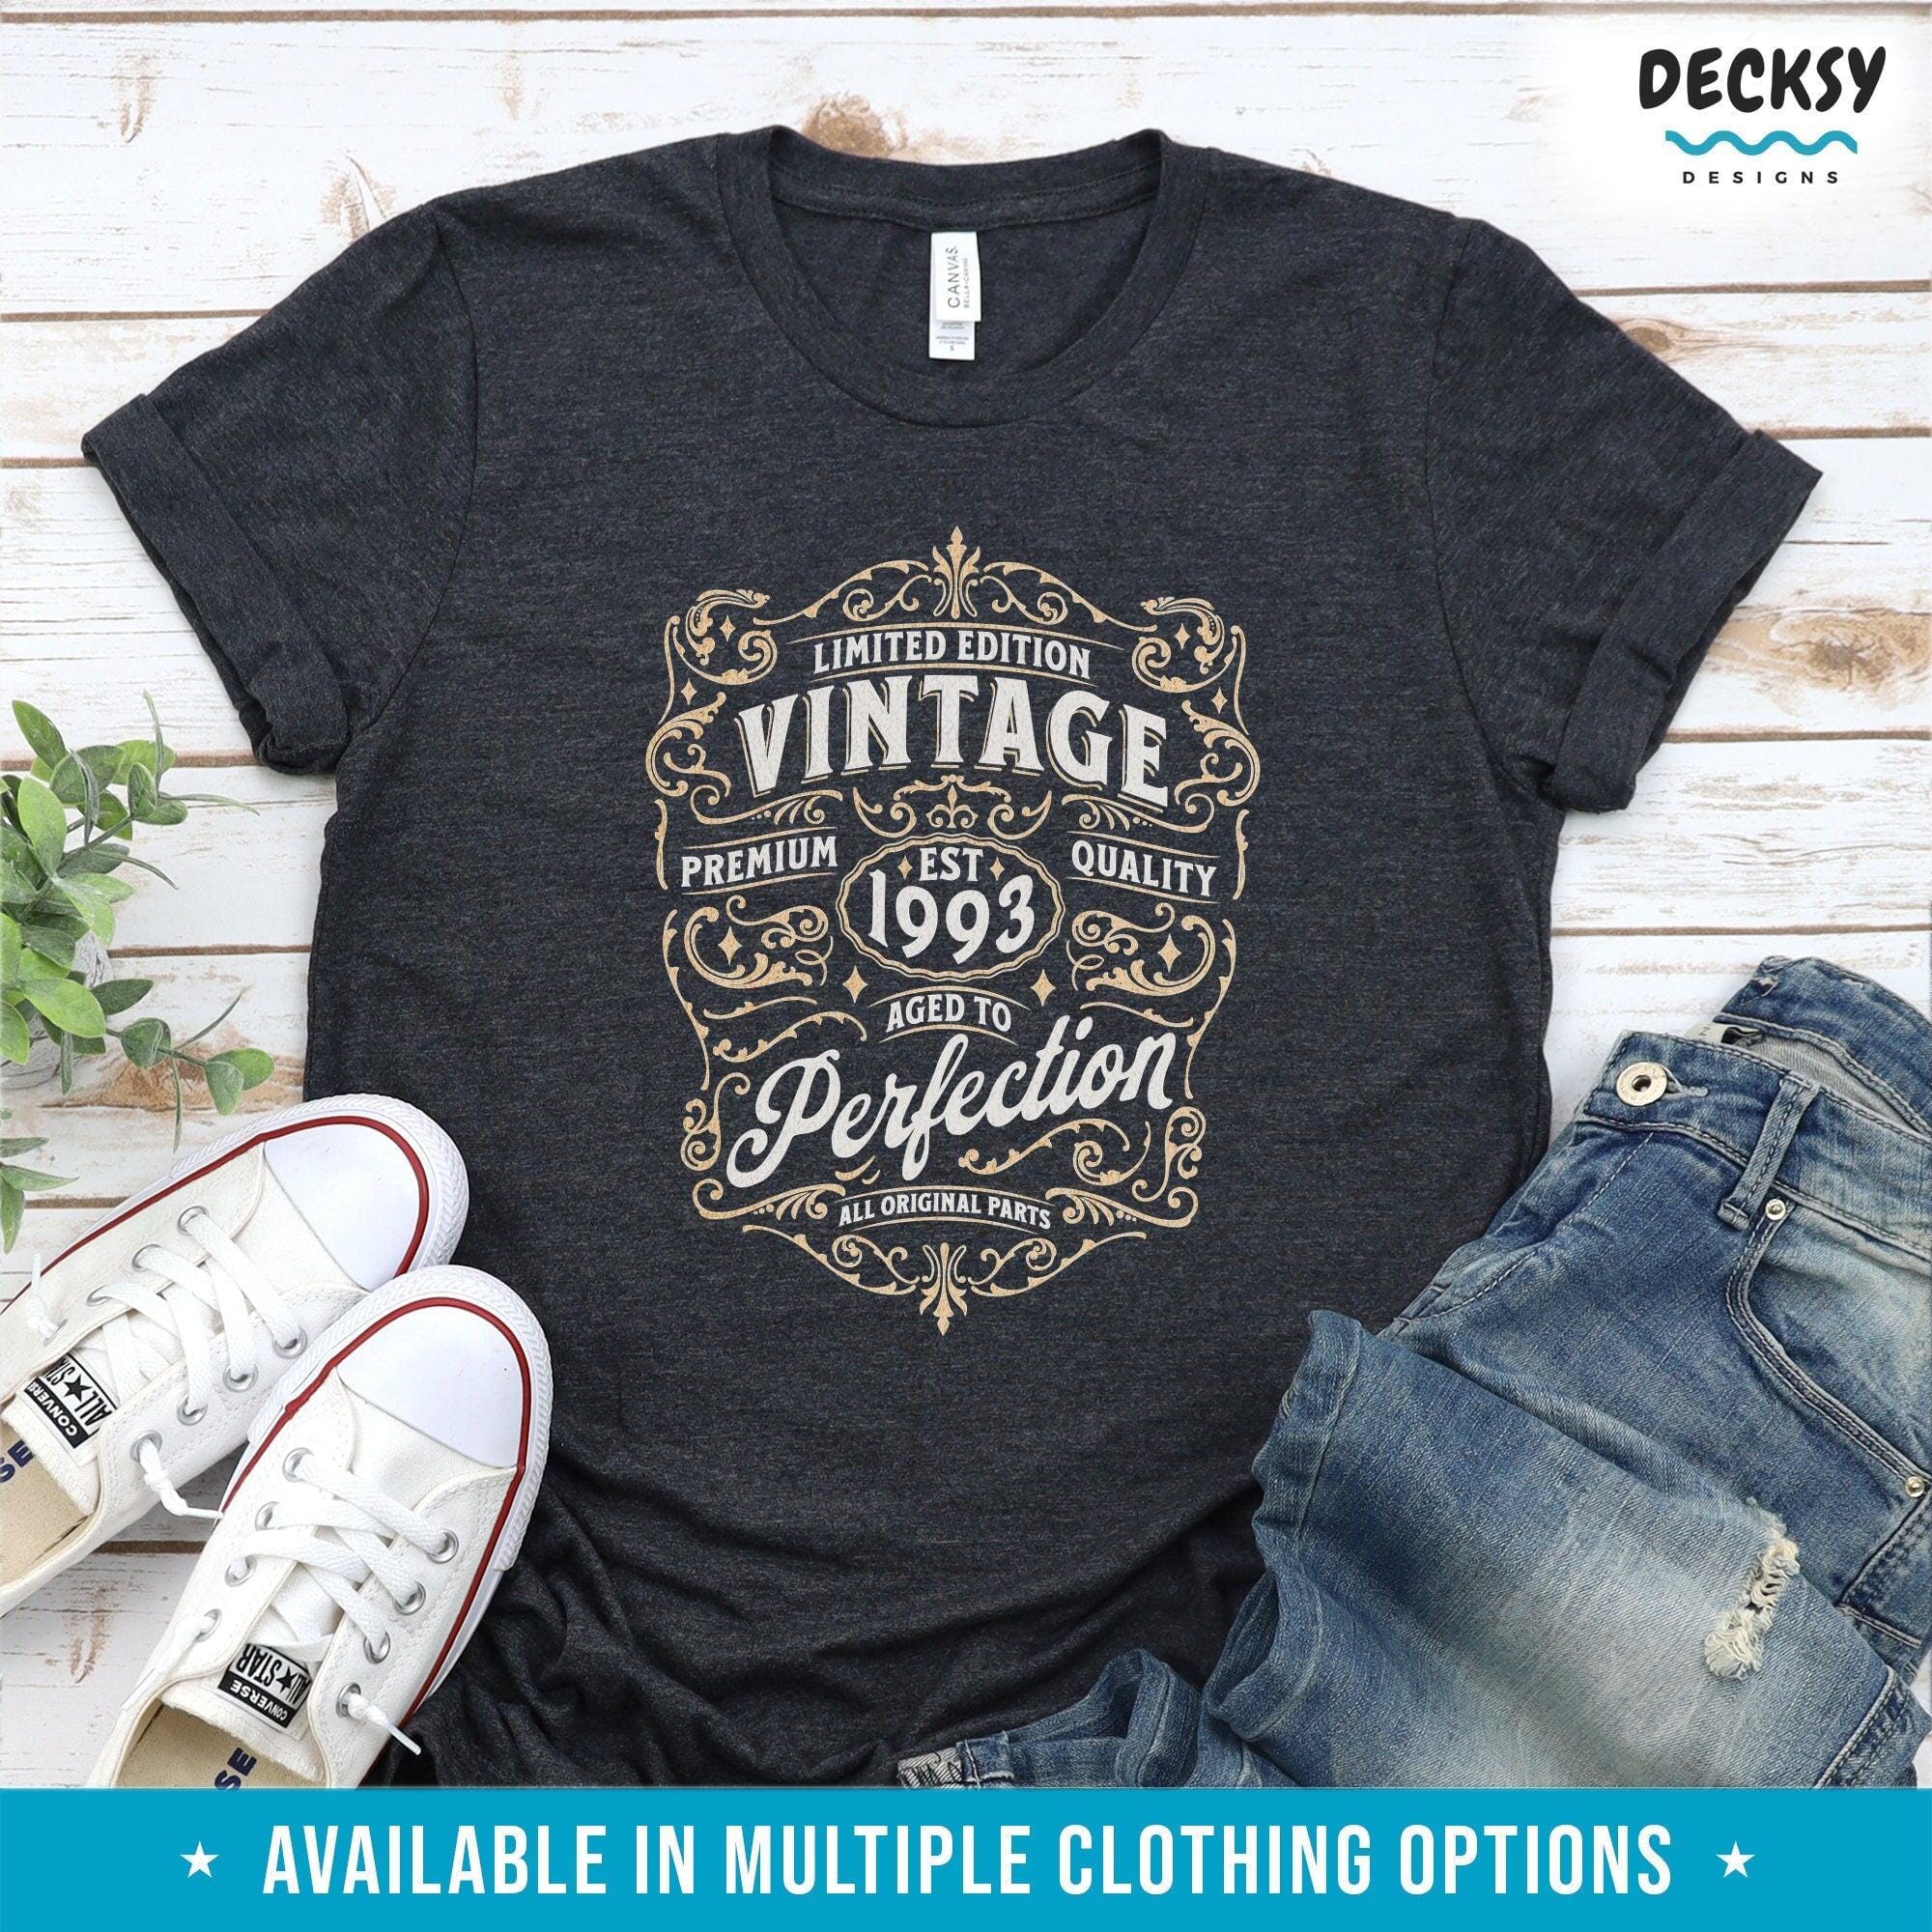 30th Birthday Shirt, 1993 Gift For Thirtieth Birthday-Clothing:Gender-Neutral Adult Clothing:Tops & Tees:T-shirts:Graphic Tees-DecksyDesigns